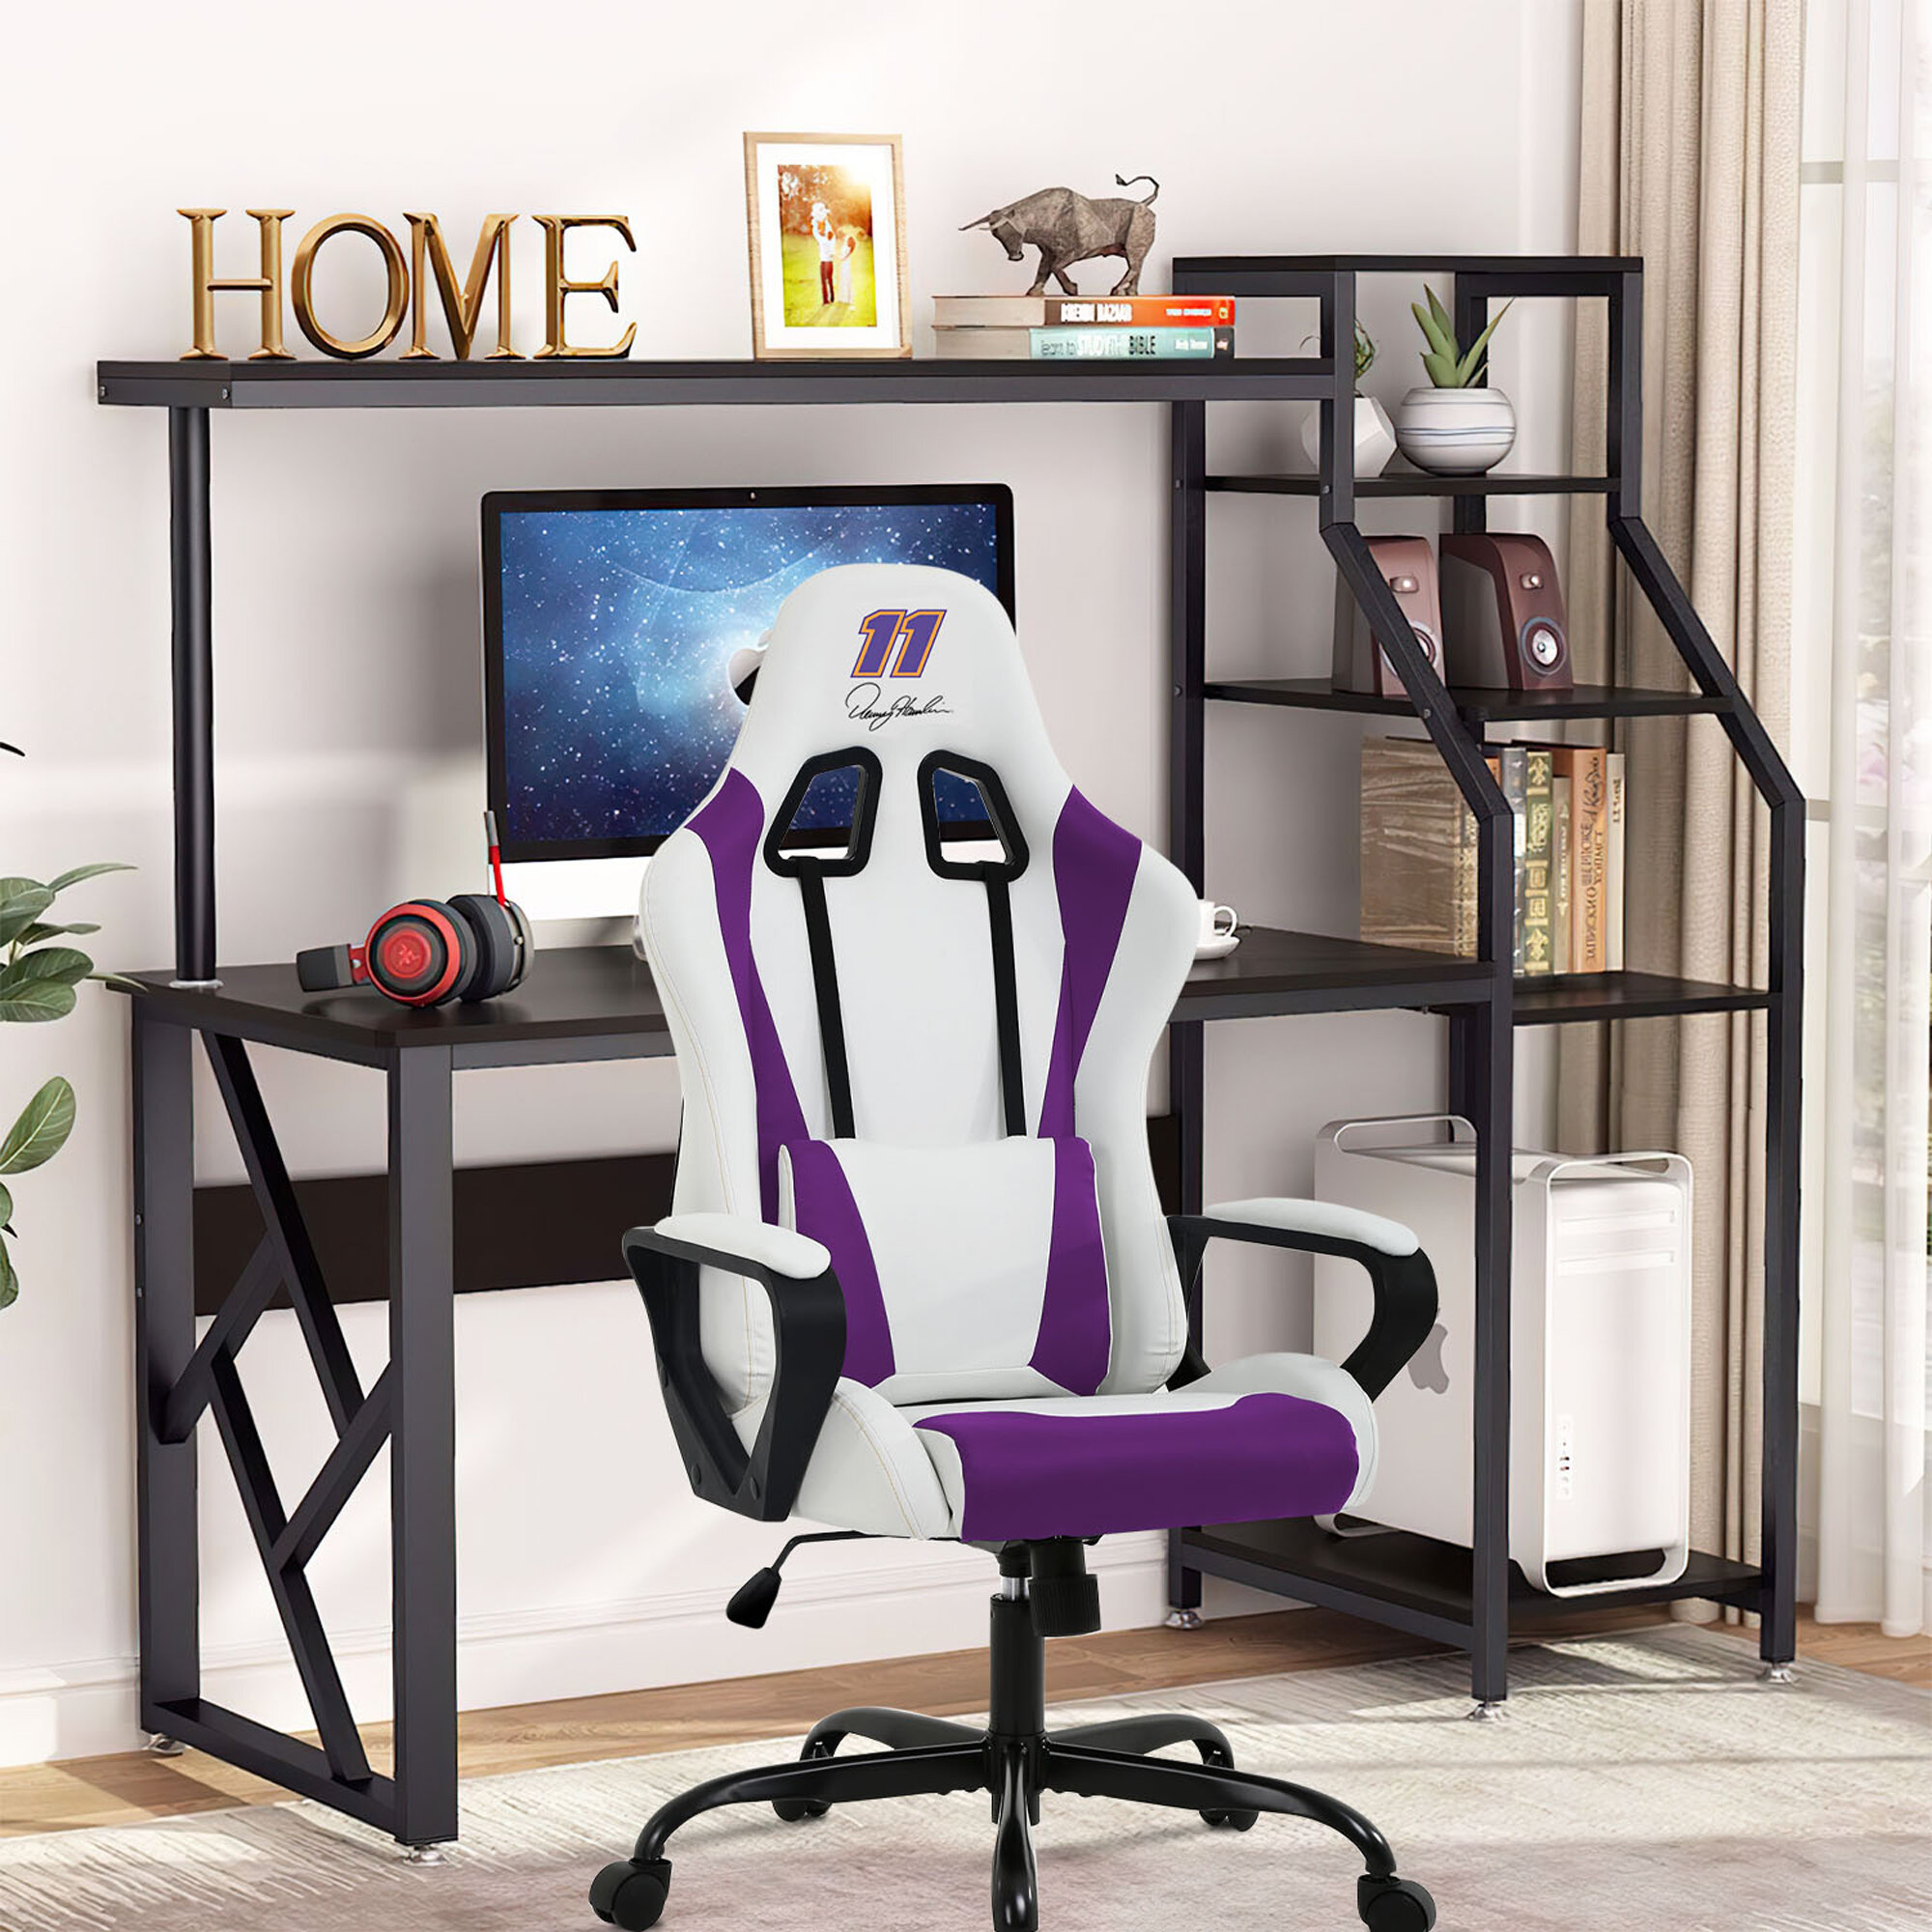 Ergonomic Gaming Chair Racer Computer Office Chair Recliner Leather Swivel Desk 